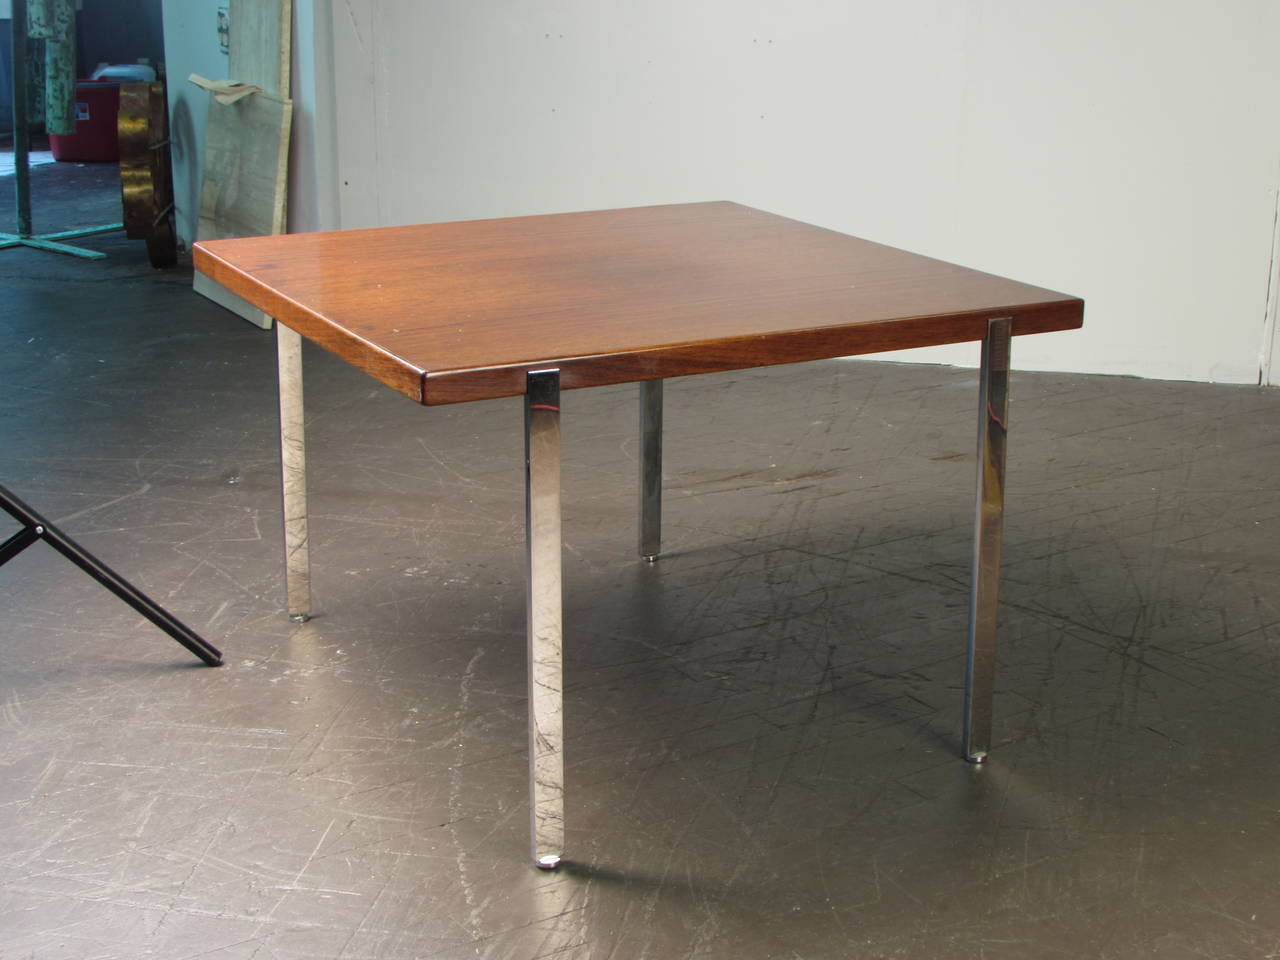 Simple Rosewood and Chrome Side Table by Harvey Probber, 1960s. Excellent vintage condition. Originally part of the living room suite and sat at the end of the sofa, which is also for sale.

We offer free regular deliveries to NYC and Philadelphia